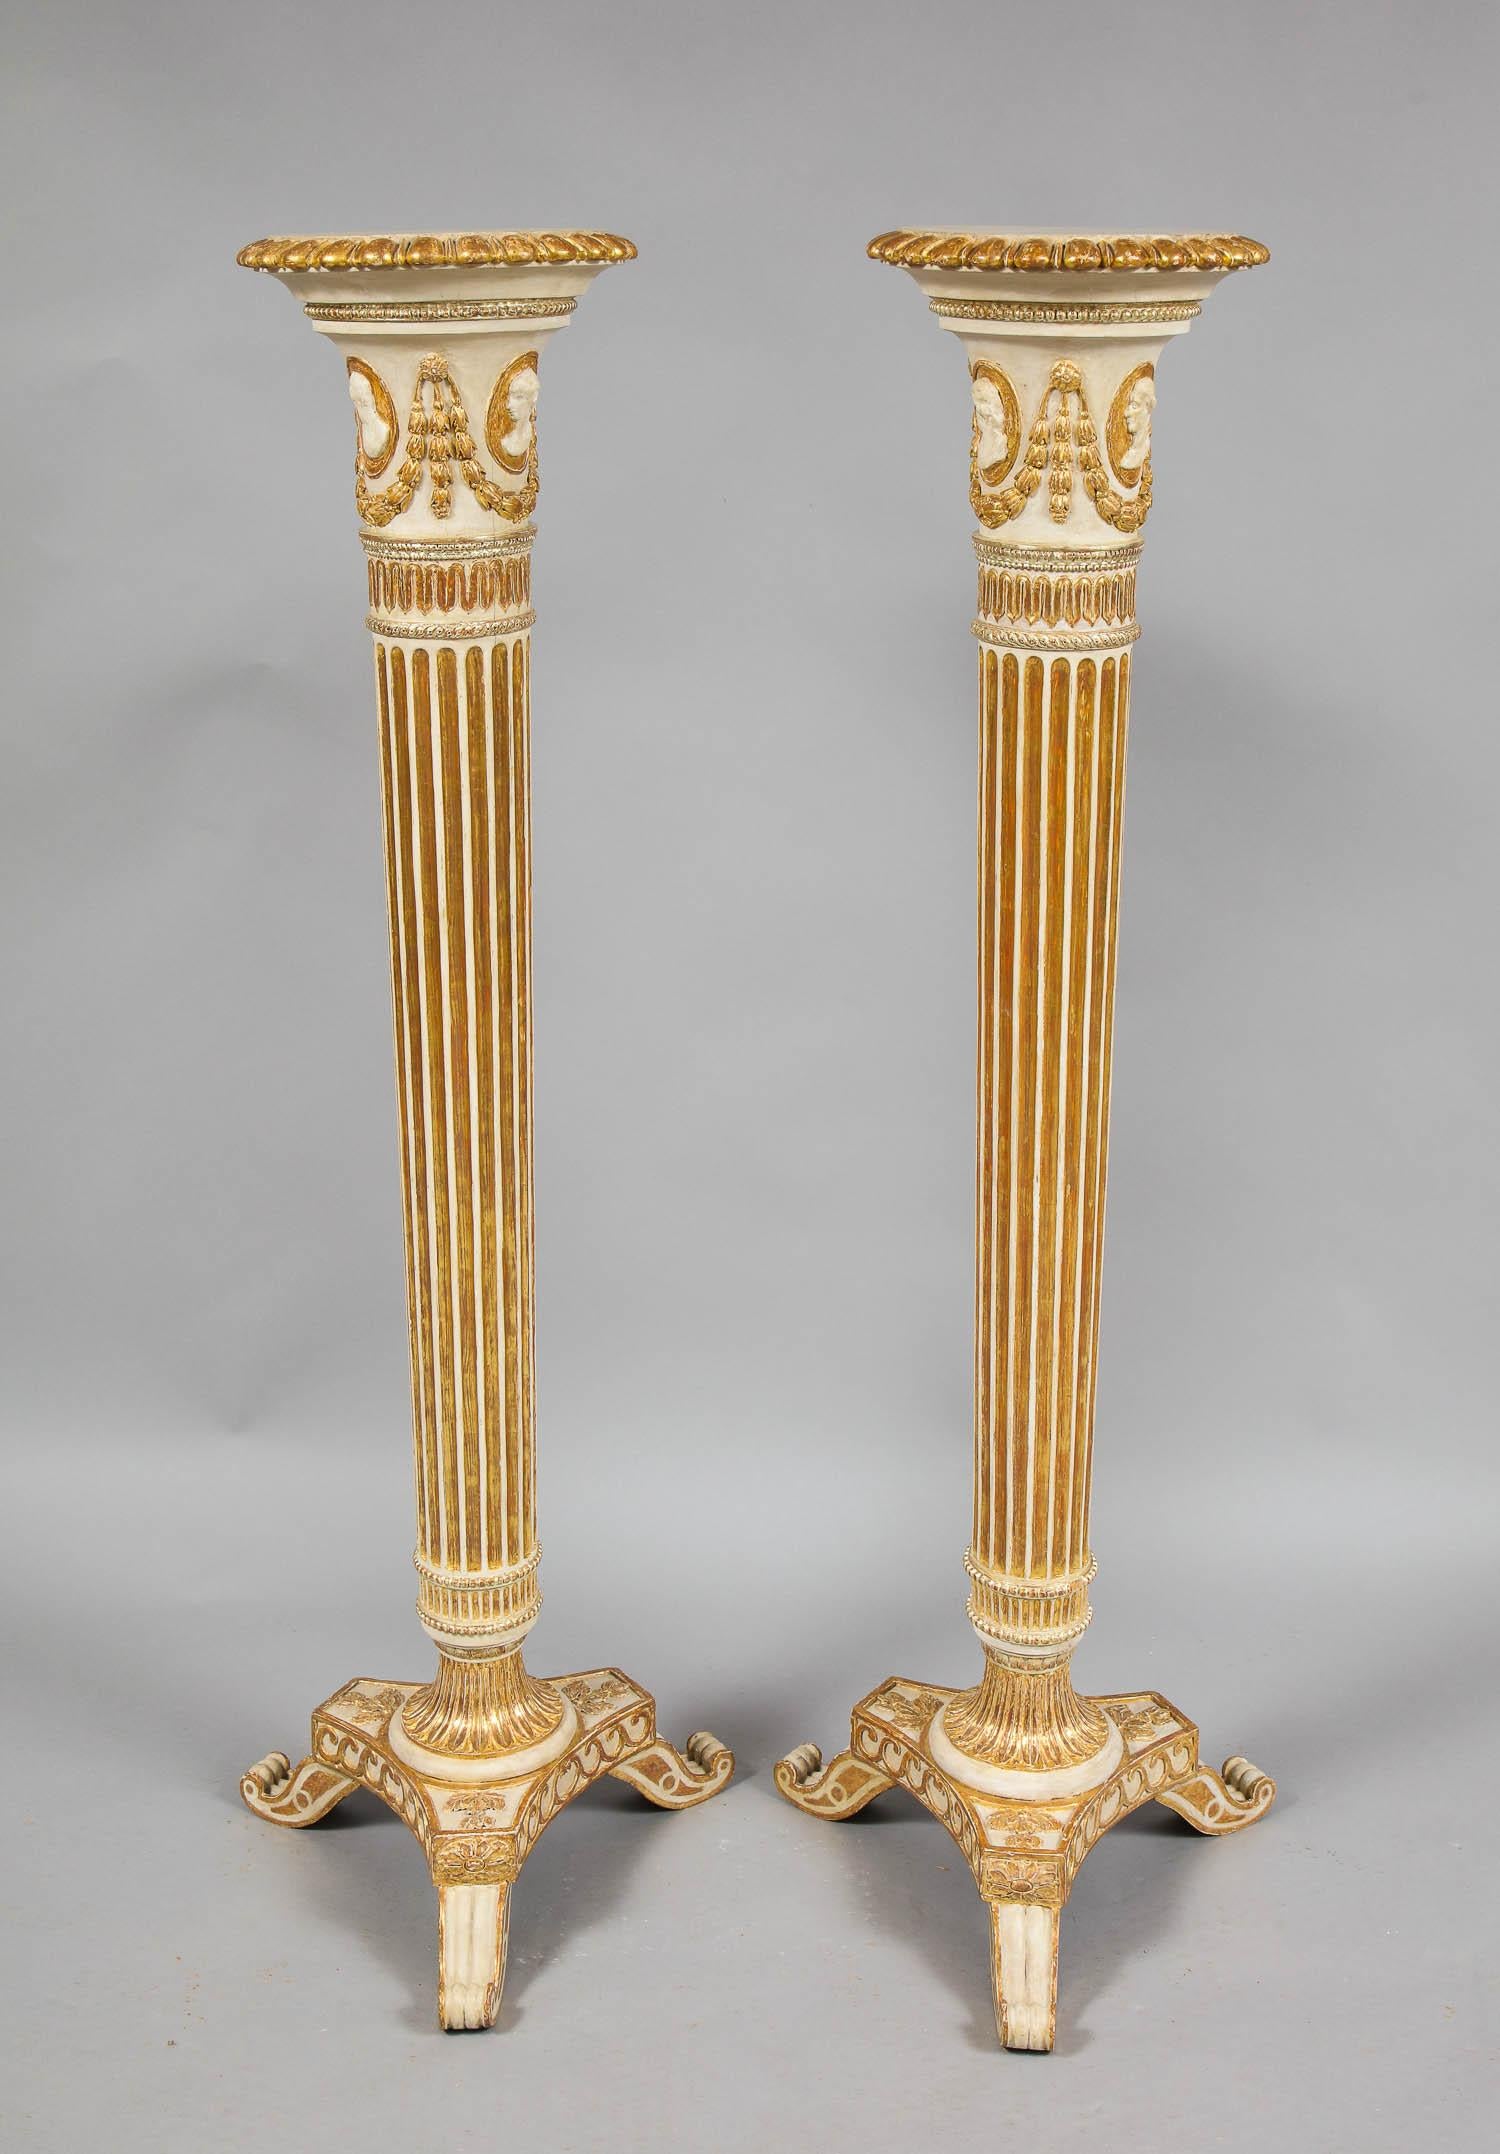 Pair of Adam pedestals possibly by Thomas Chippendale the Younger
 
Fine pair of Adam Neoclassical pedestals having gadrooned tops over classical medallion busts, the turned collars having carved long leaf caps, fluted shafts, foliage carved bases